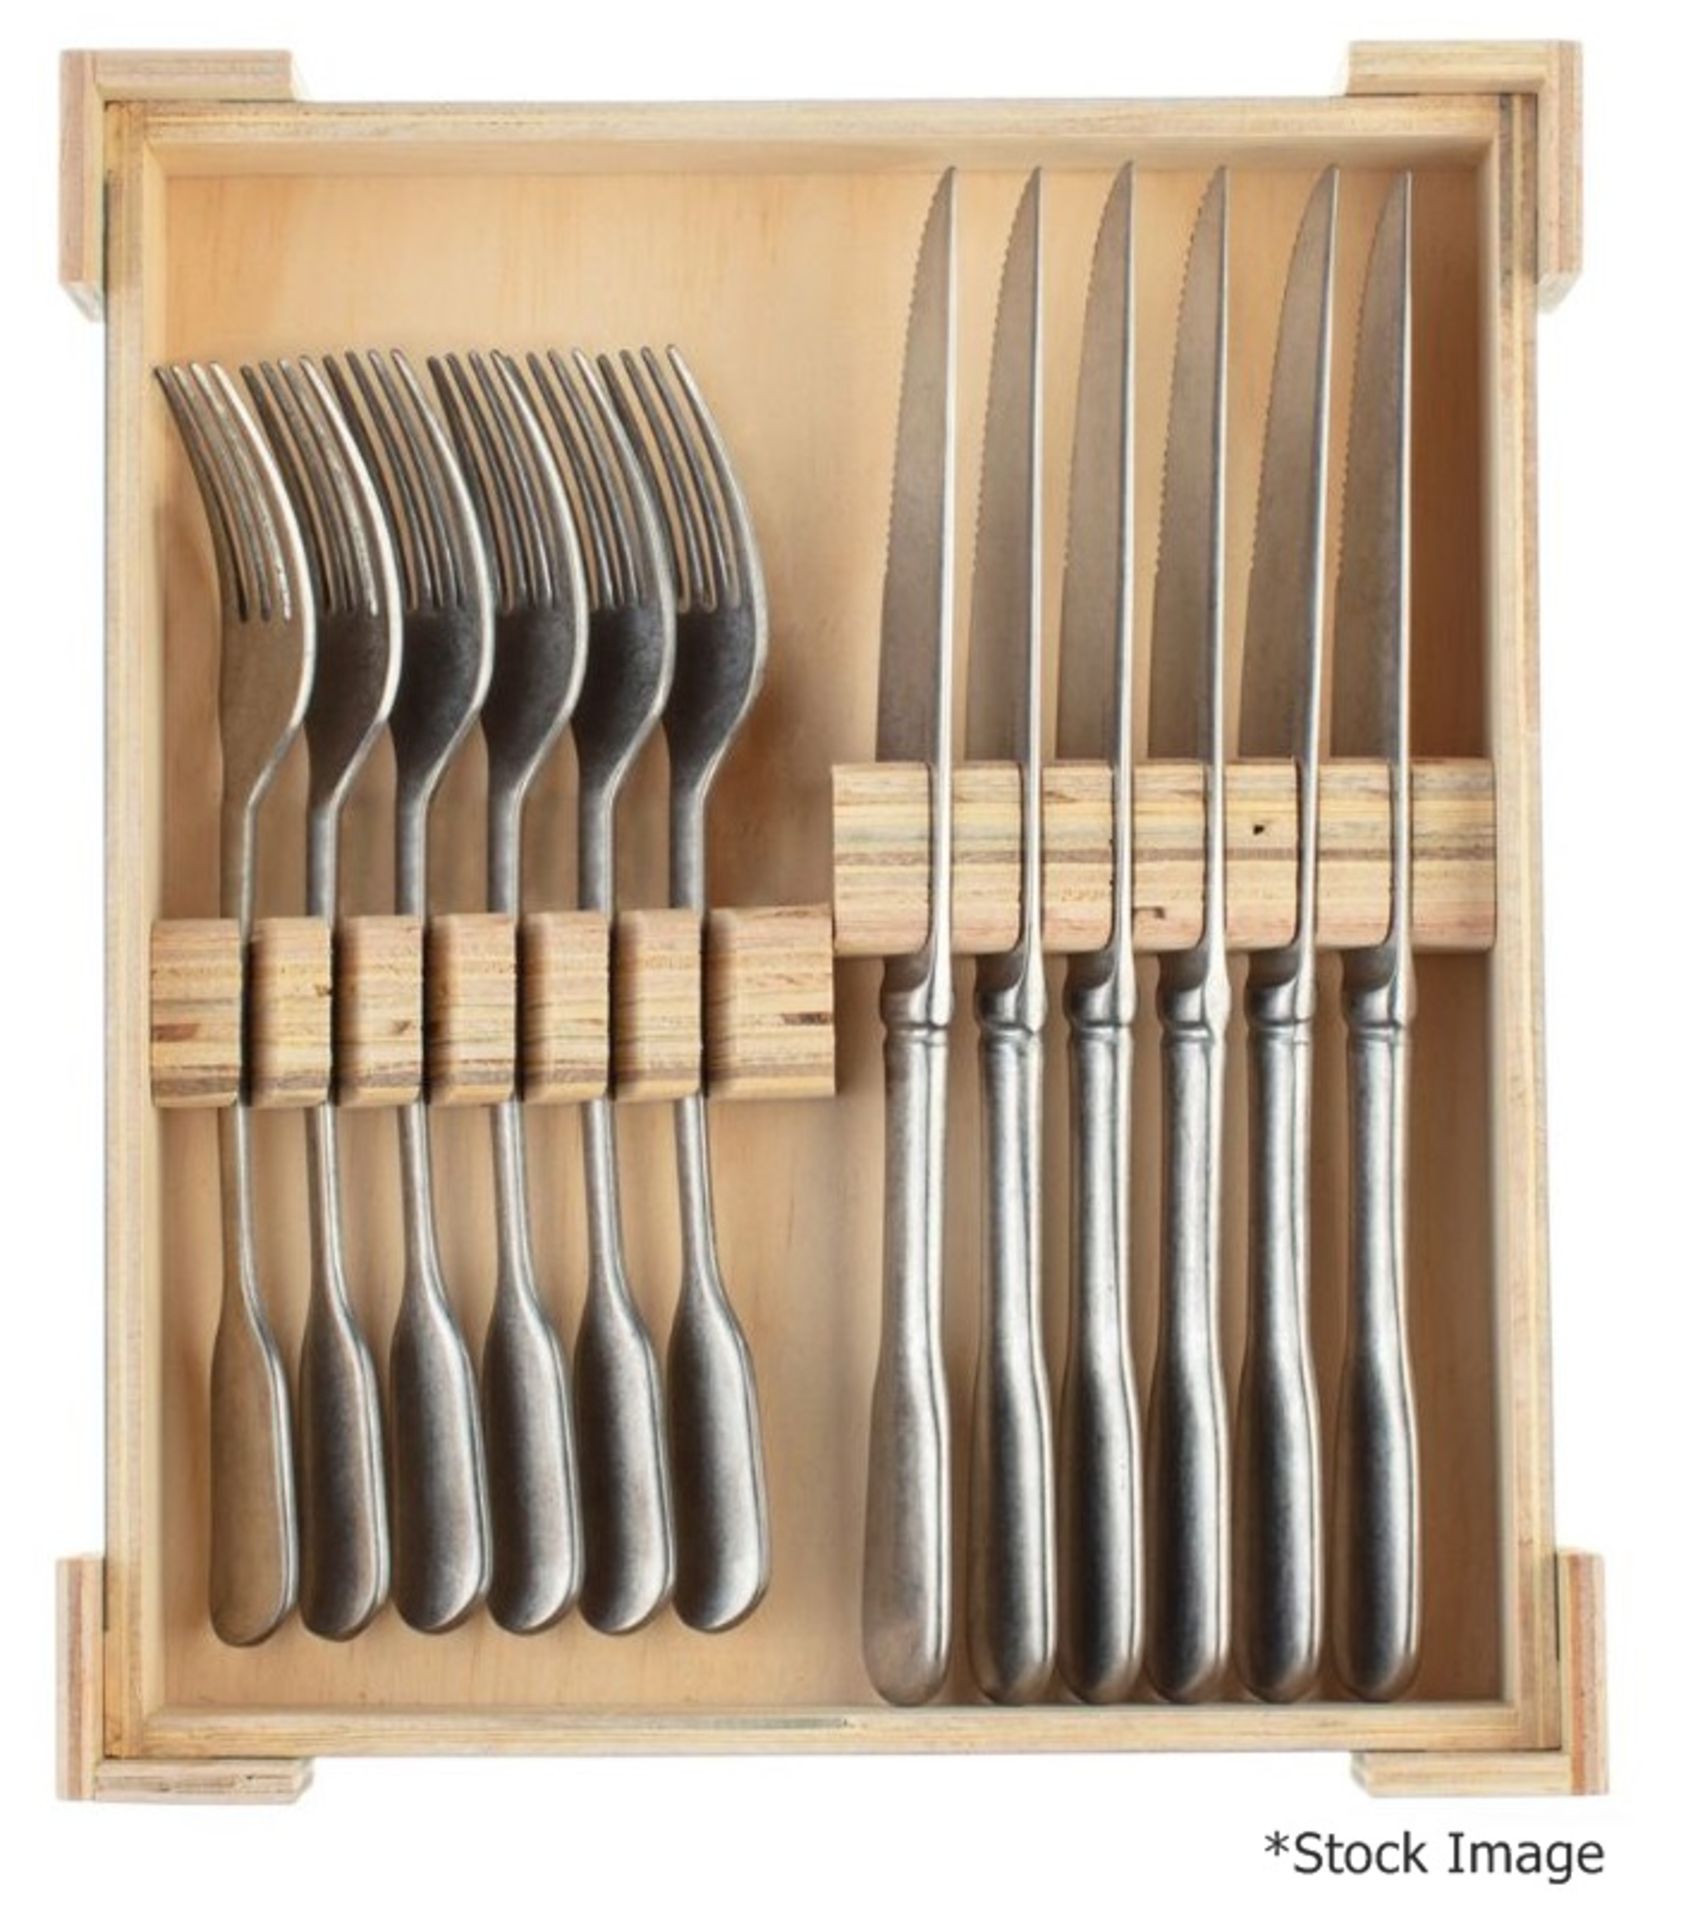 1 x CHARINGWORTH 'Fiddle' Stainless Steel Steak Knife And Fork Cutlery Set - RRP £78.00 - Designed - Image 2 of 7